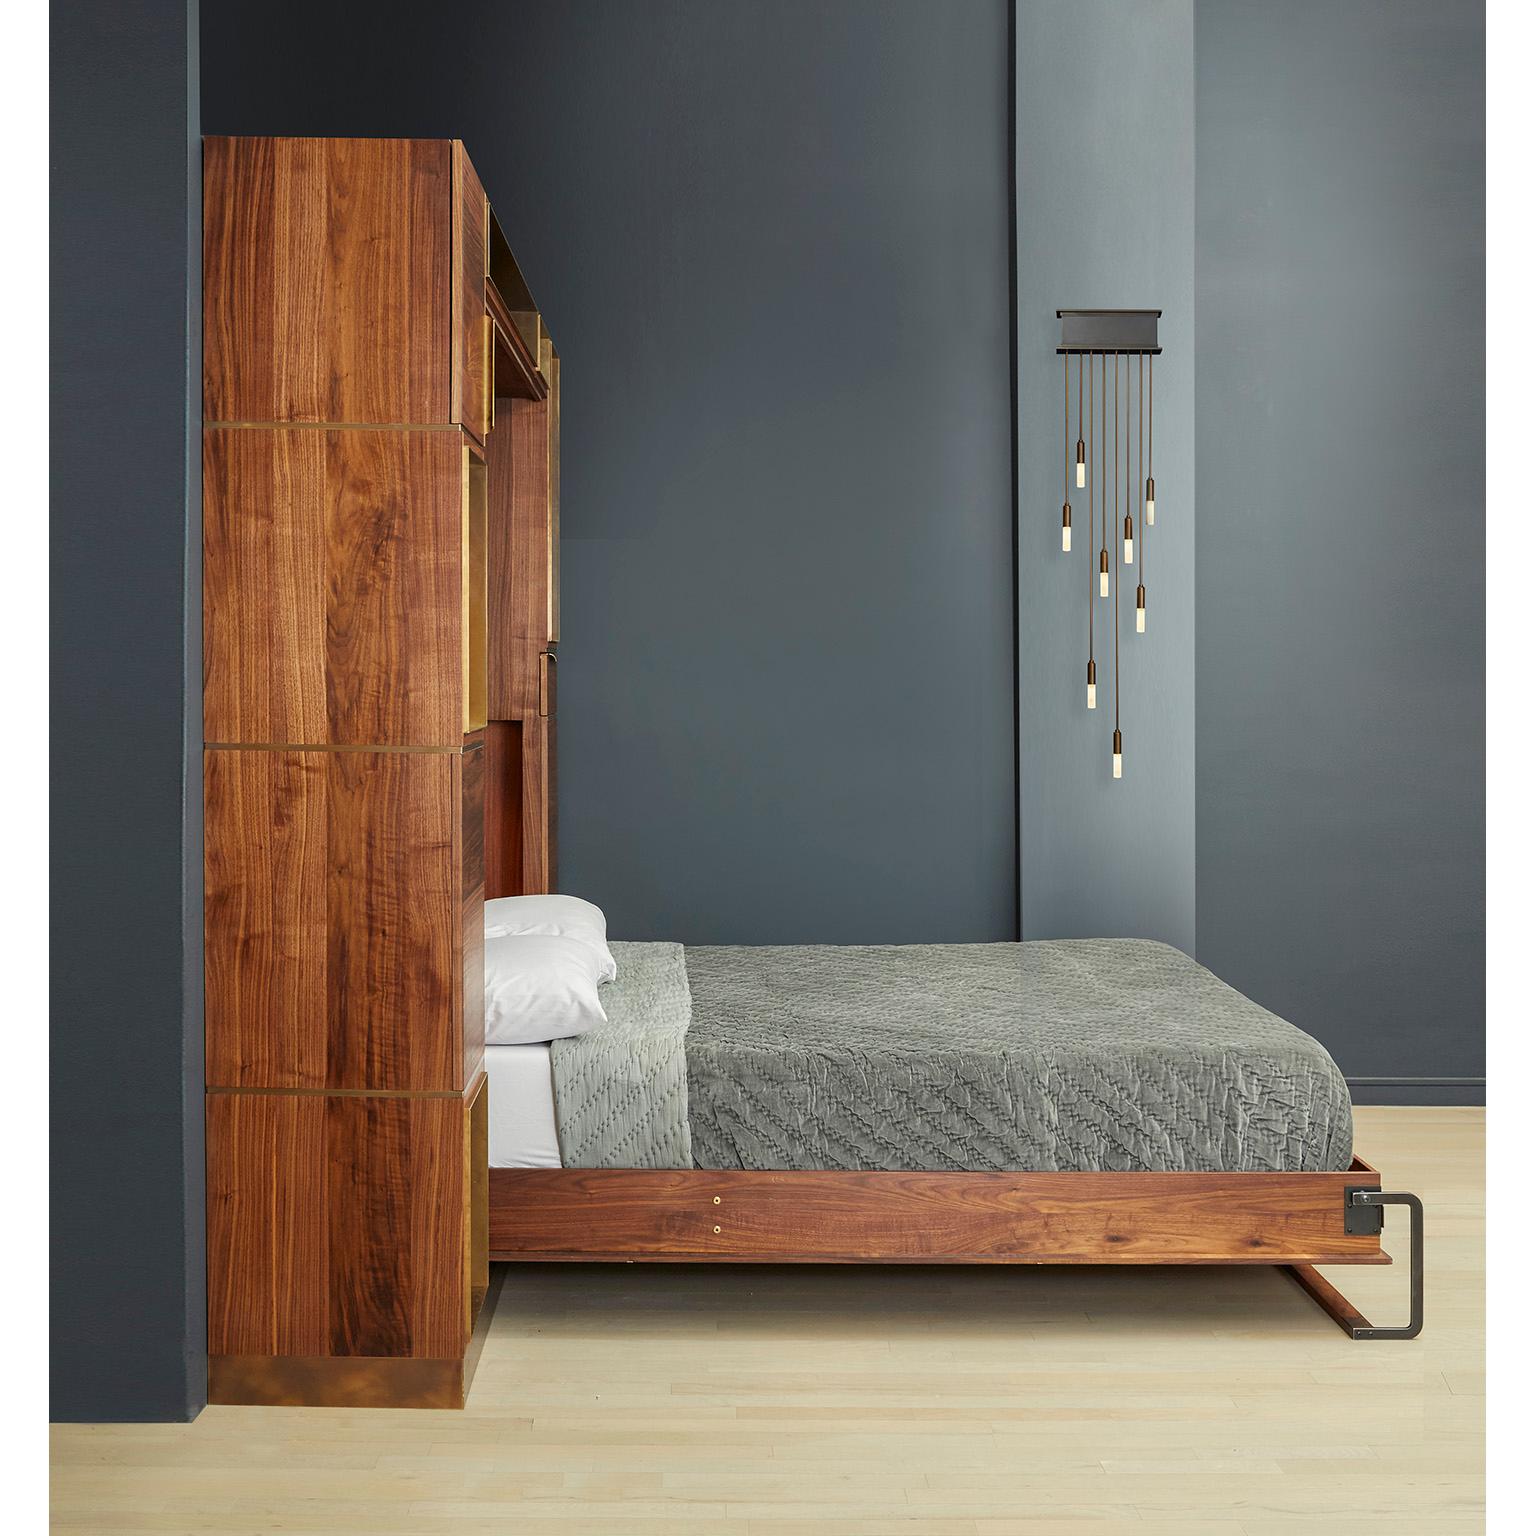 Designed to feel like a built-in piece of millwork, Amuneal’s Murphy bed conceals a queen-sized mattress behind panels of silvered walnut with oxidized bronze inlays. With the bed closed, the walnut and brass panels work with brass clad cubbies and